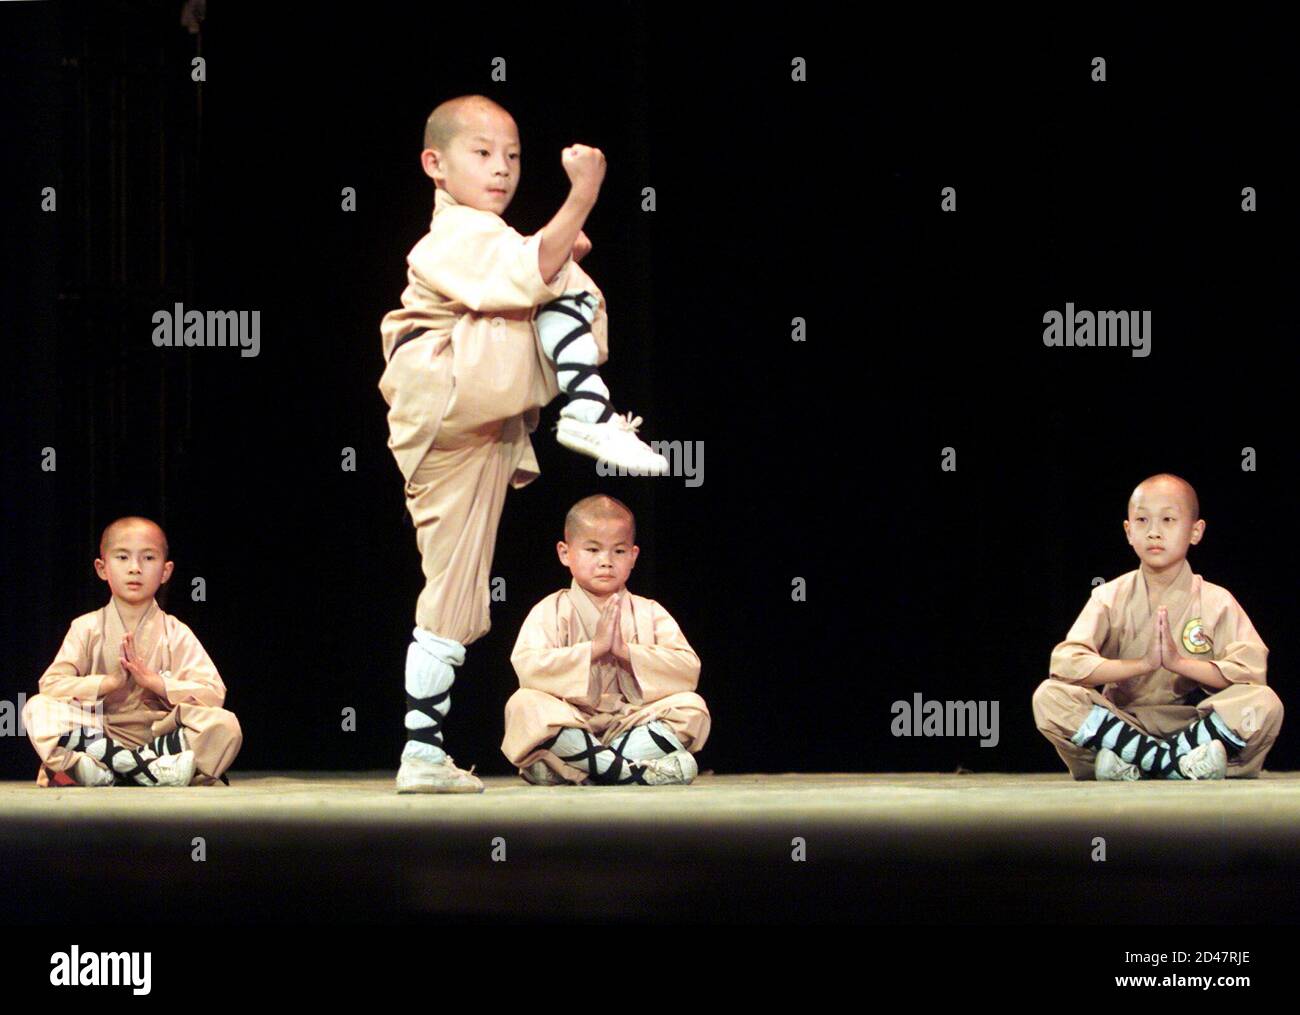 Young monks from Shaolin Martial Monks Troupe of Songshan perform Shaolin Kung Fu during the rehearsal of performance 'Shaolin Heroes' in Hong Kong July 20, 2001. The performance will be held in the territory in July. Stock Photo